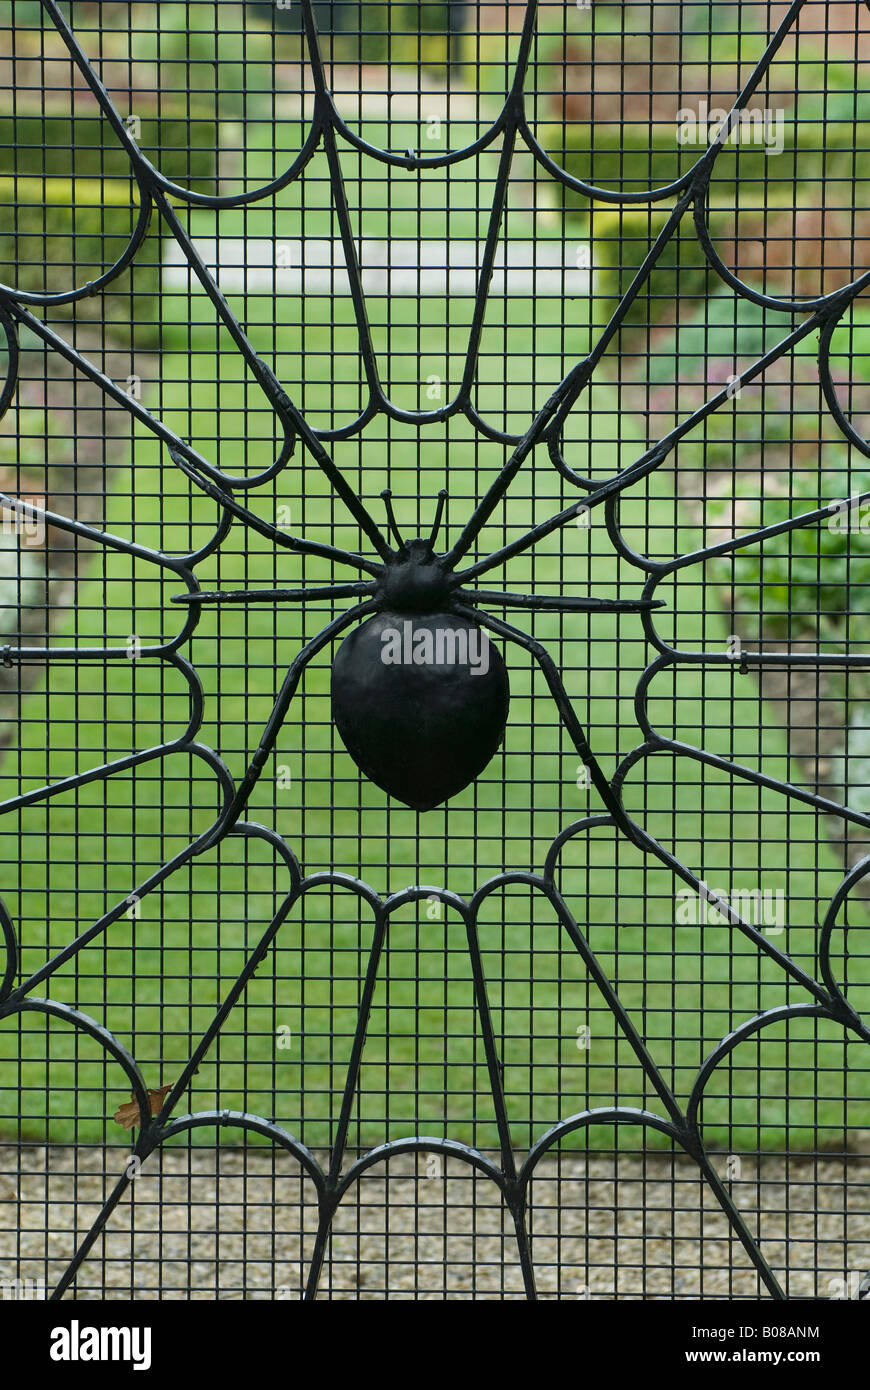 spiders web on wrought iron gate in garden Stock Photo